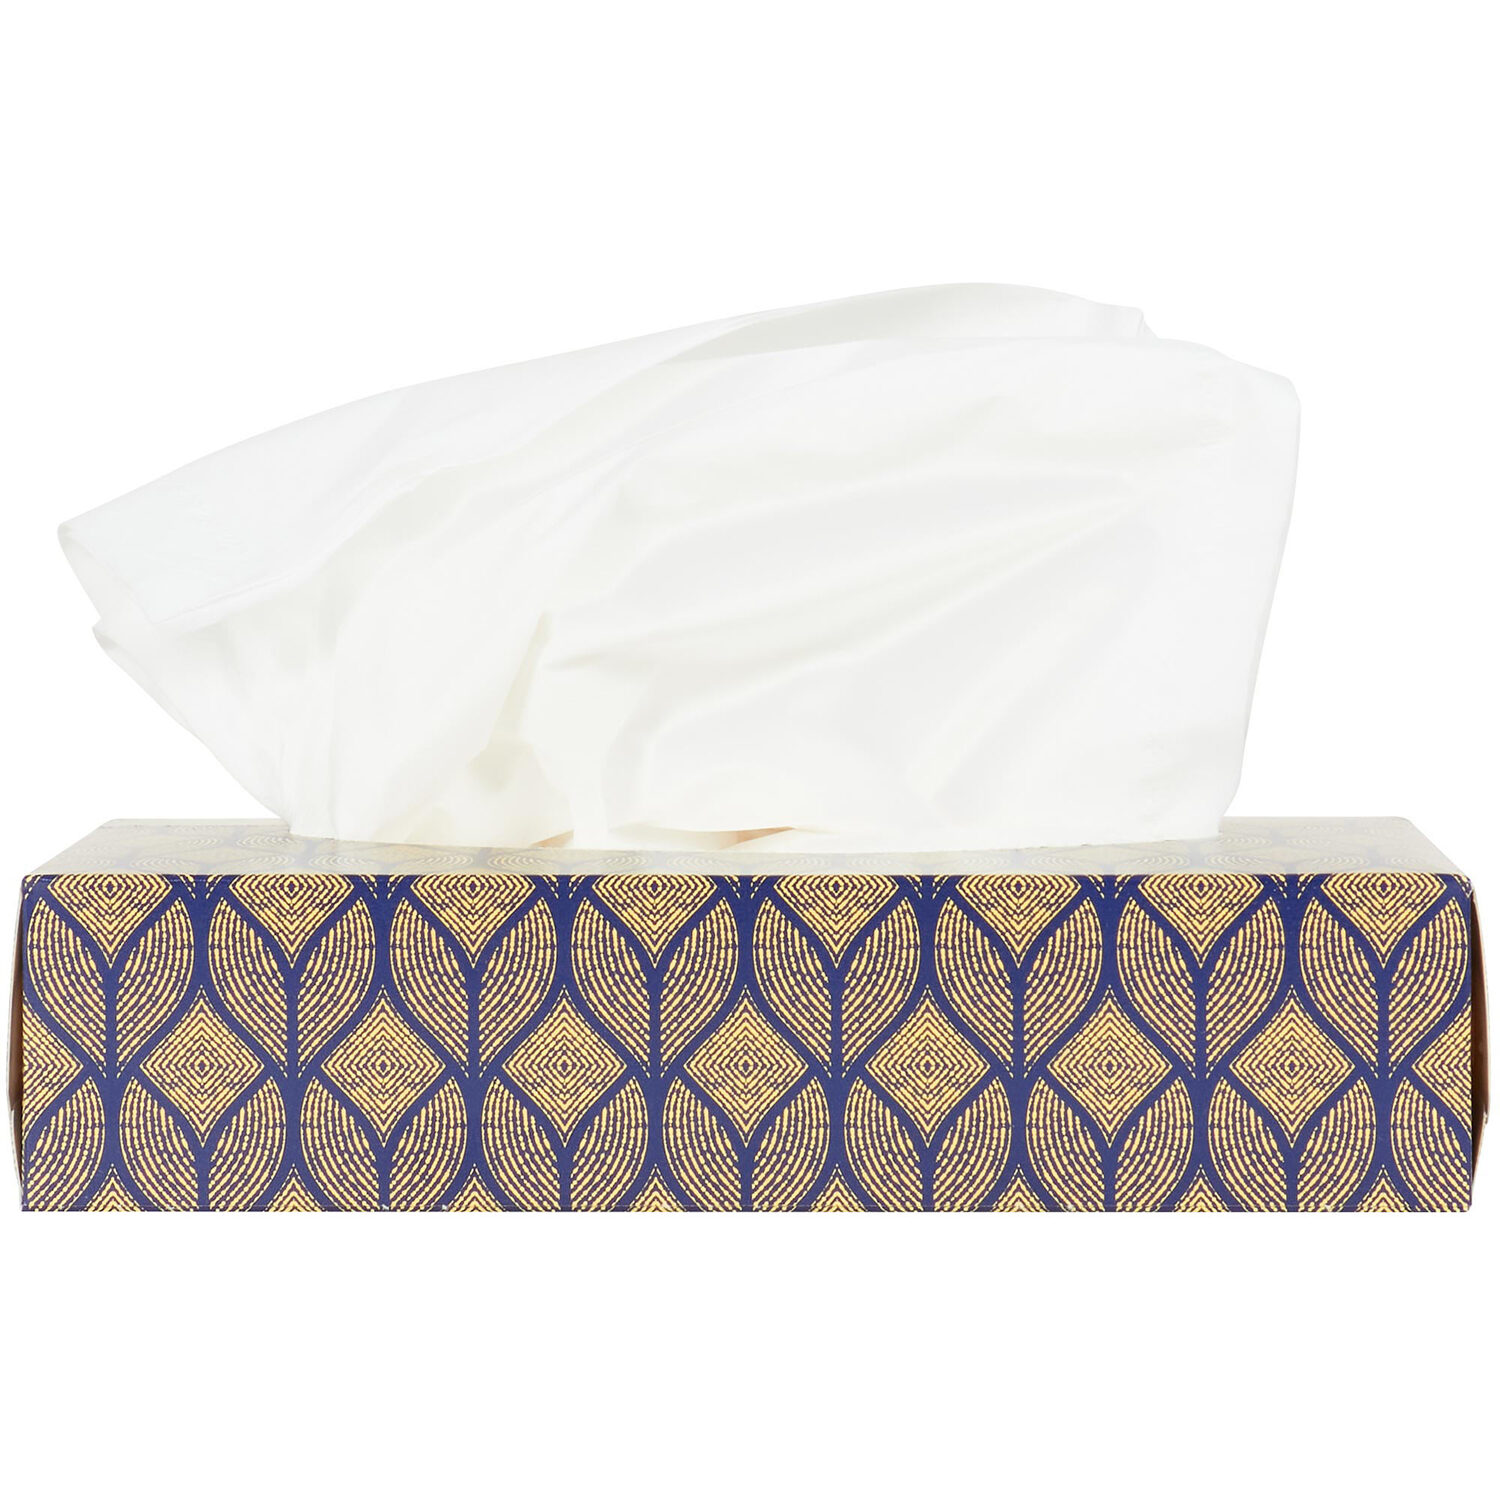 Softy Luxury Soft Tissues 72 Sheets 3 Ply Image 5